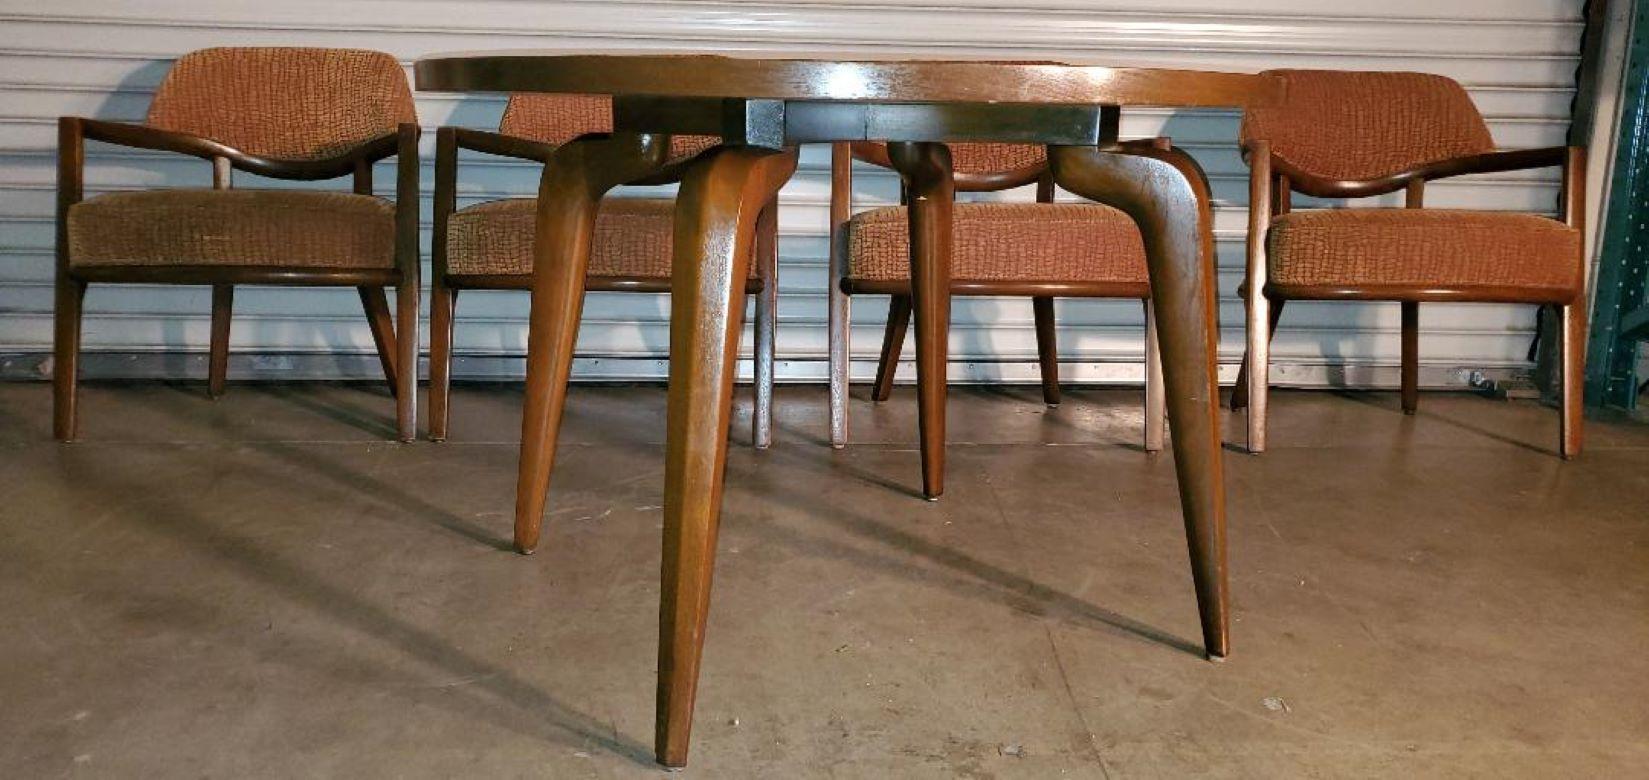 Upholstery RARE 1950s Maurice Bailey Monteverdi Young Card Table & 4 Maurice Bailey Chairs For Sale